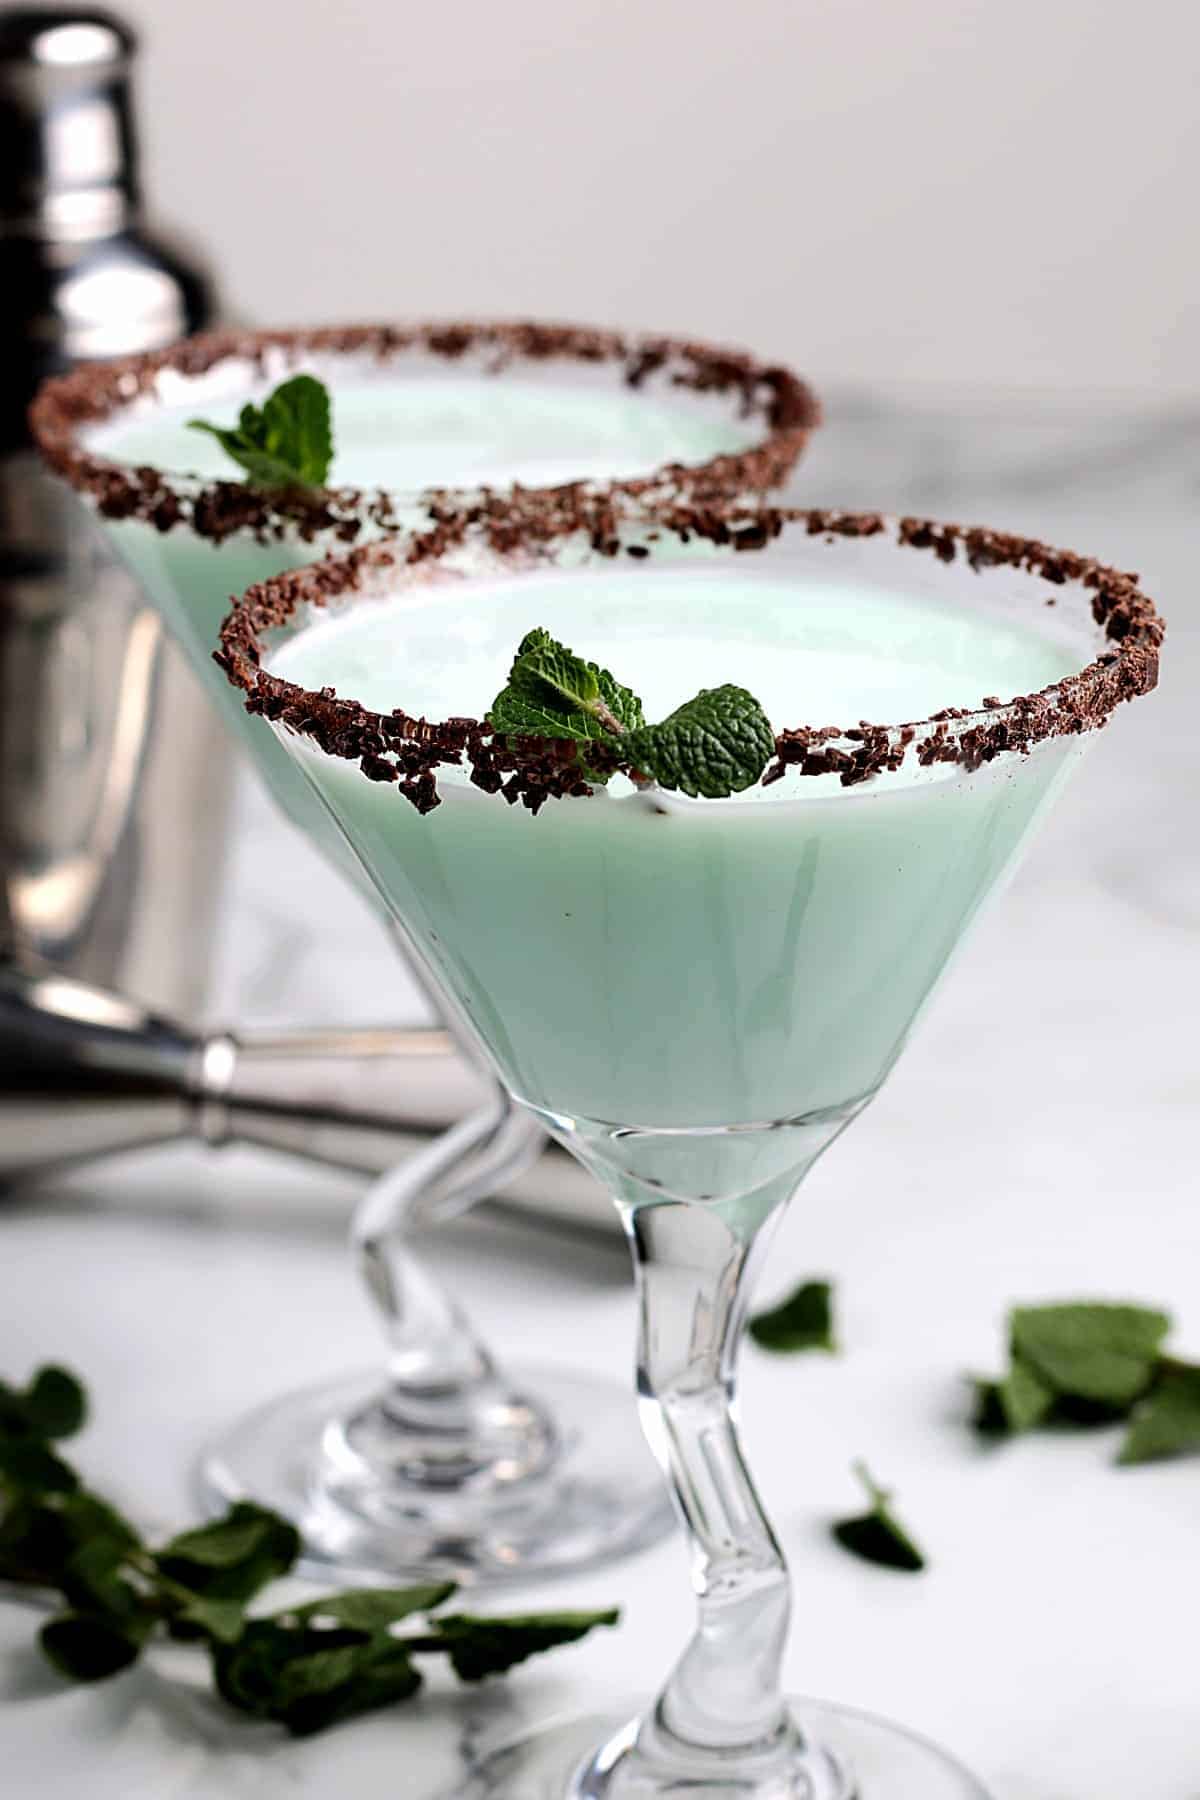 Two martini glasses filled with a minty green cocotail.